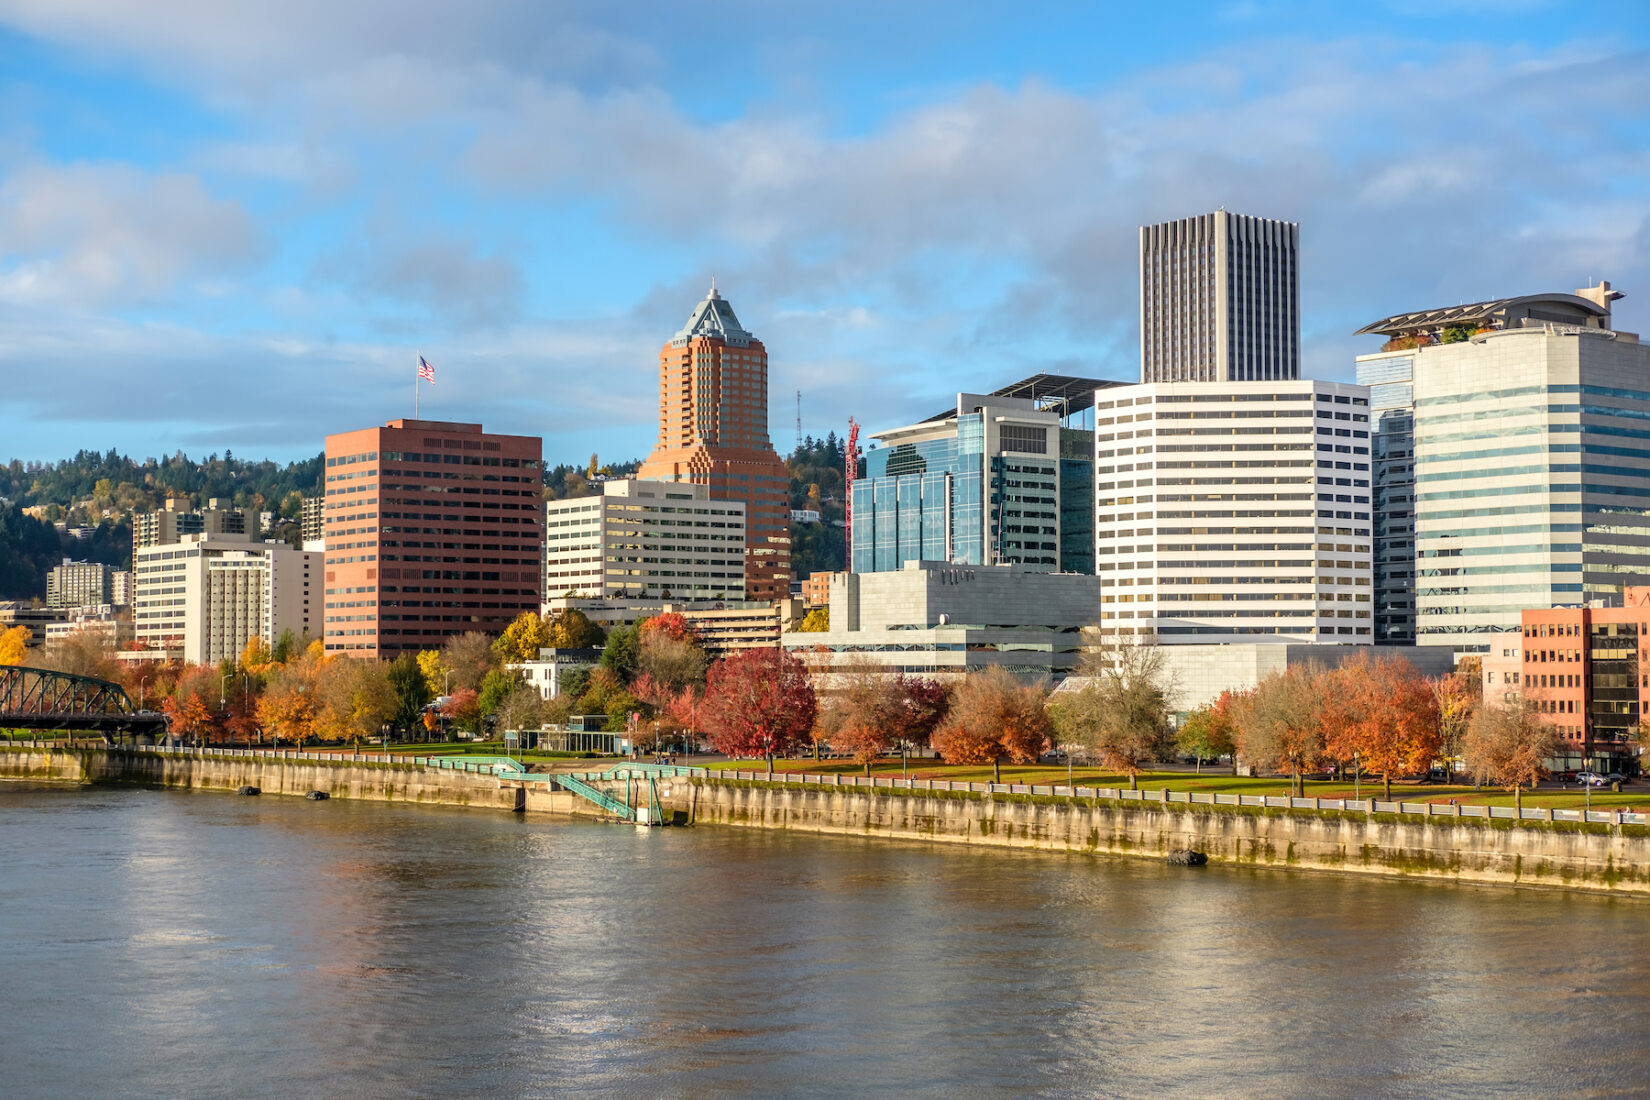 A view of the Portland city skyline against the water.